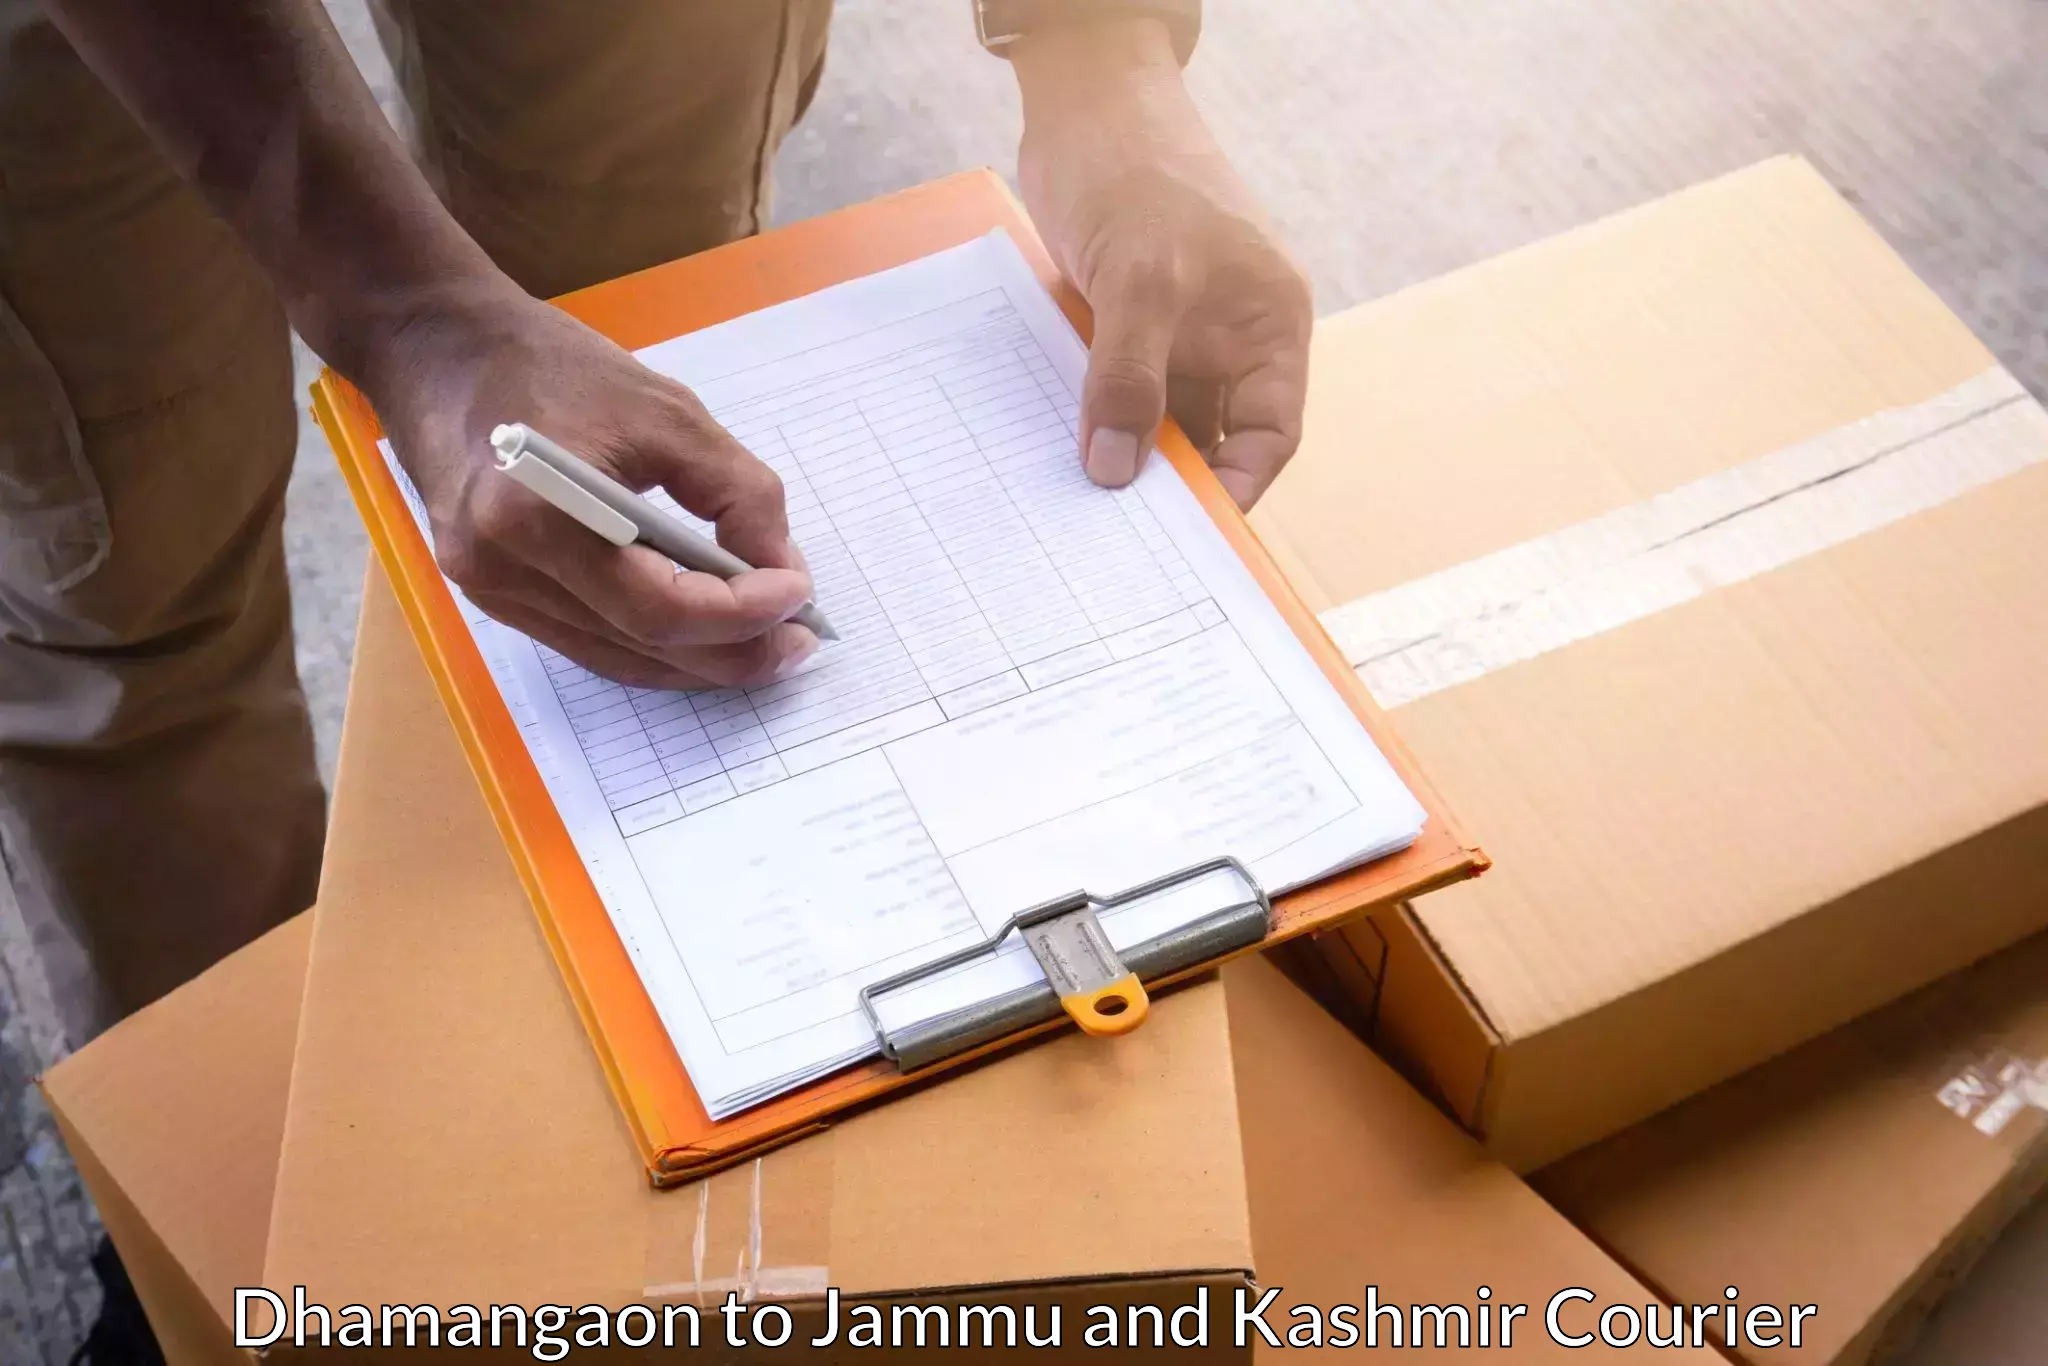 Courier service efficiency in Dhamangaon to Poonch